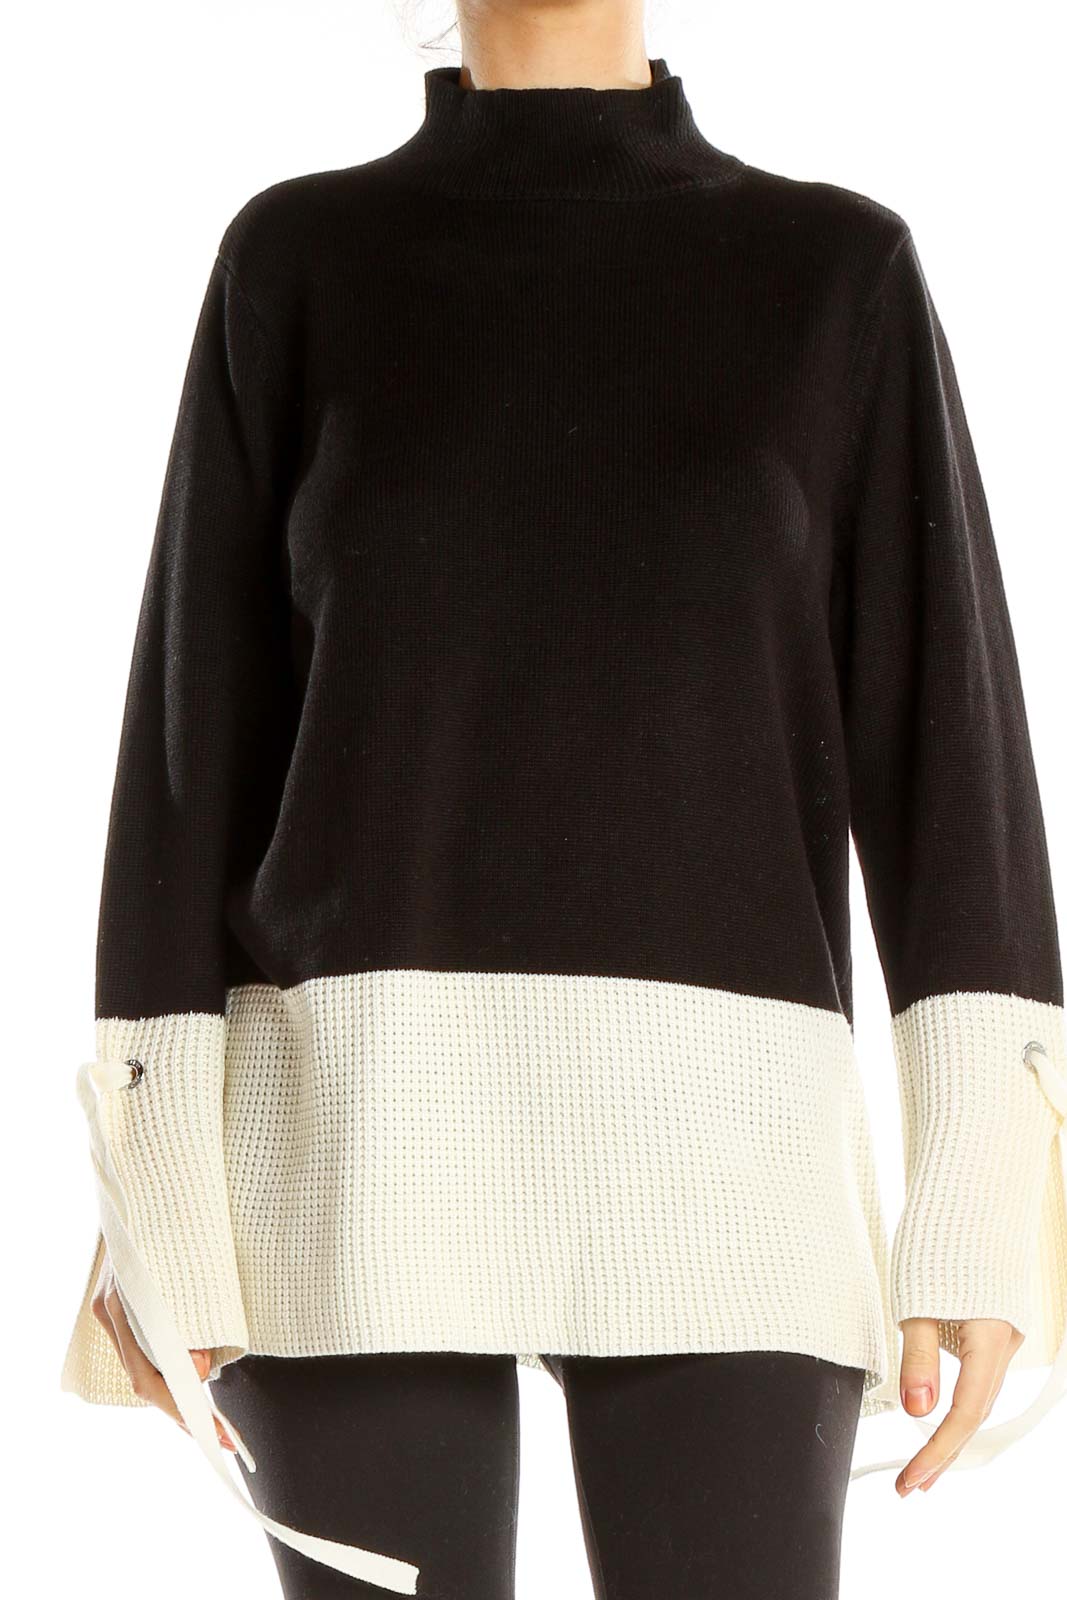 Black White Chic Colorblock Sweater Top Front